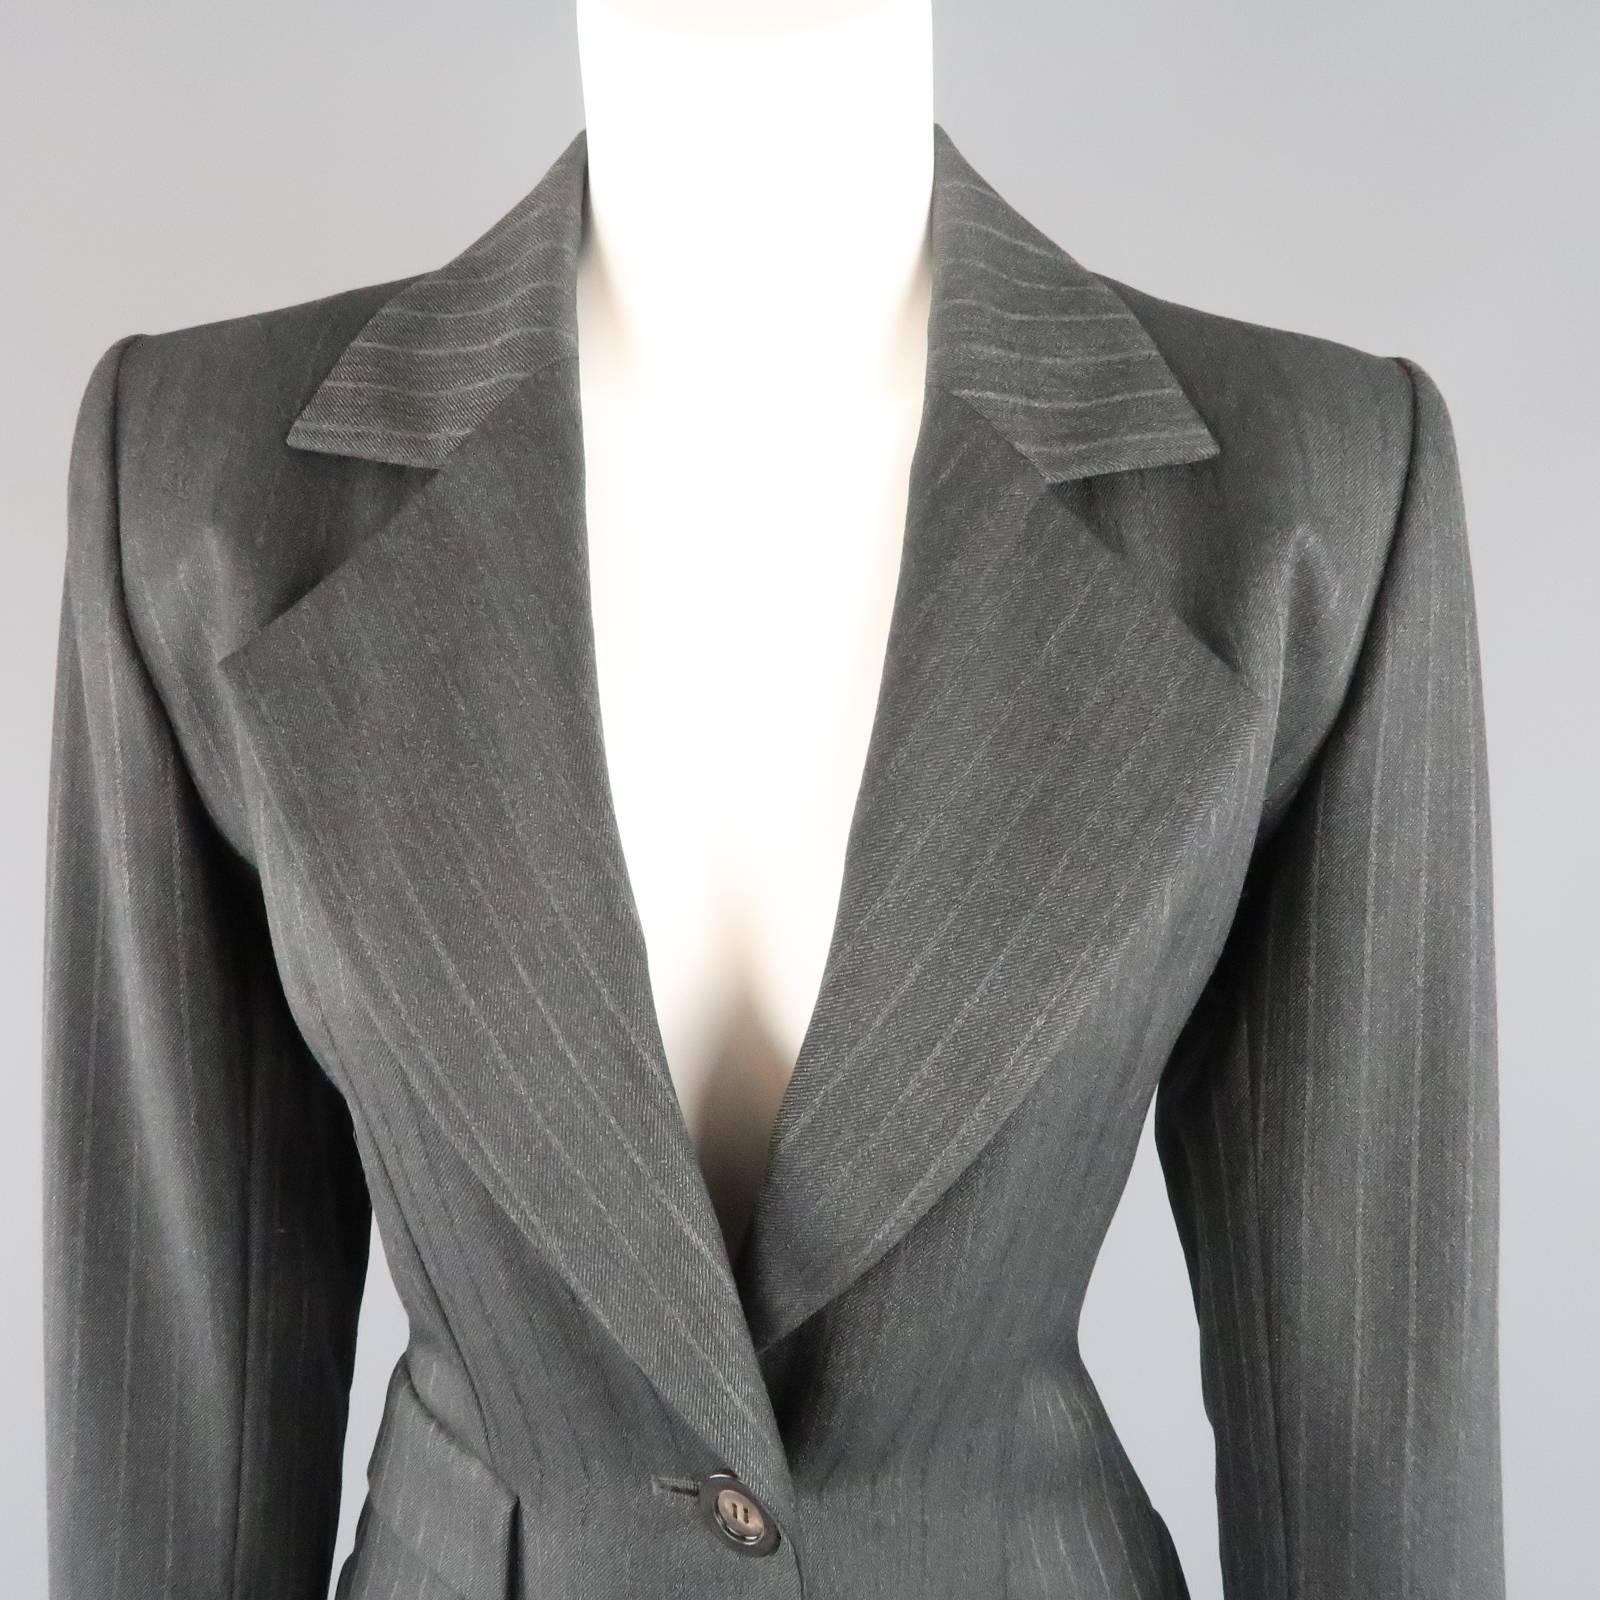 Vintage YVES SAINT LAURENT RIVE GAUCHE oversized blazer comes in a classic pinstripe wool and features a pointed lapel, triple flap pockets, and chic single button closure. Made in France.
 
Excellent  Pre-Owned Condition.
Marked: 38
